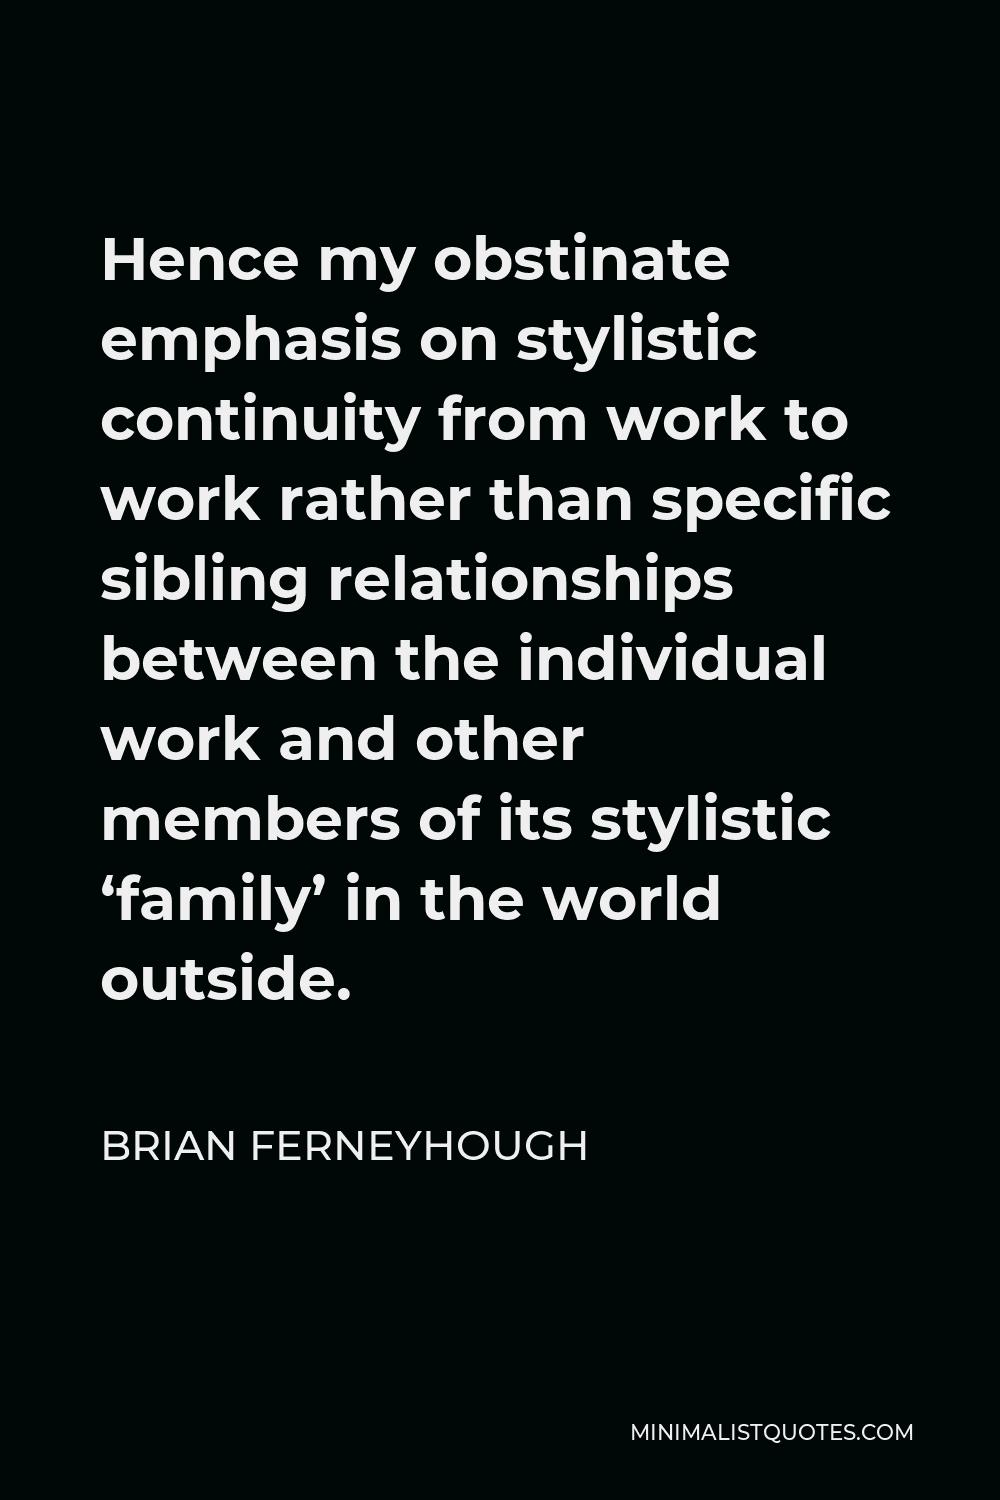 Brian Ferneyhough Quote - Hence my obstinate emphasis on stylistic continuity from work to work rather than specific sibling relationships between the individual work and other members of its stylistic ‘family’ in the world outside.